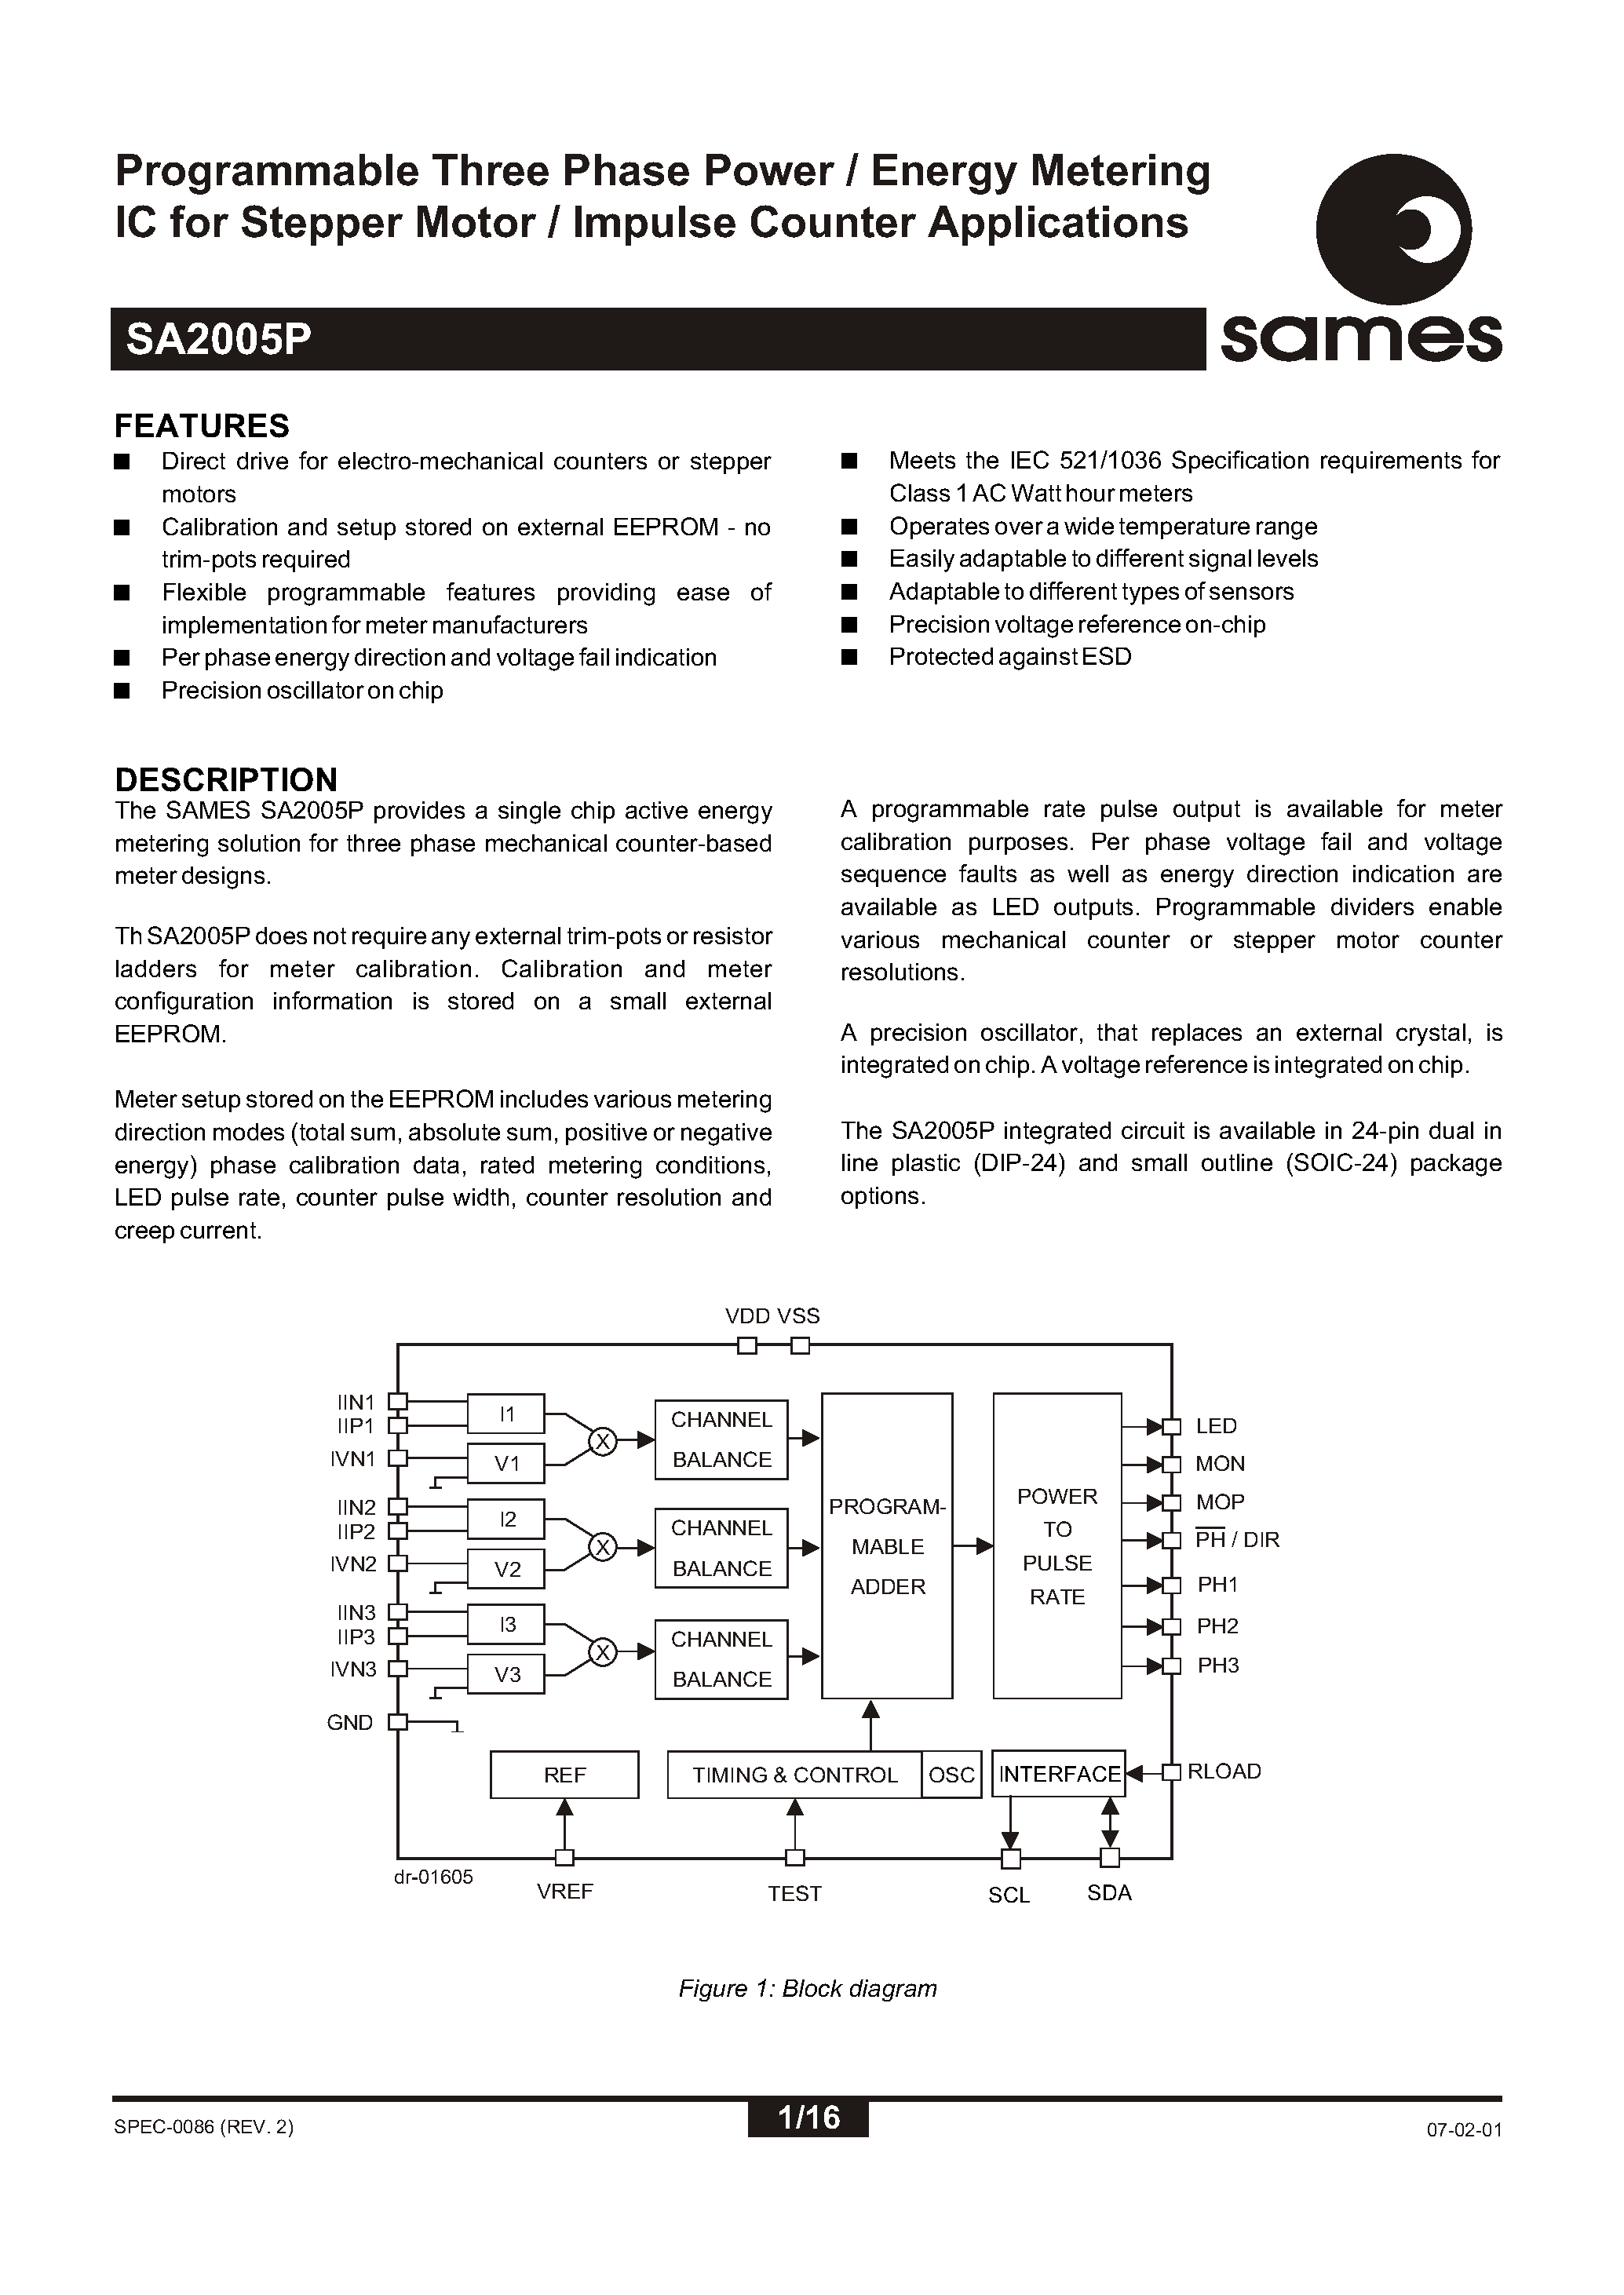 Datasheet SA2005P - Programmable Three Phase Power / Energy Metering IC for Stepper Motor / Impulse Counter Applications page 1